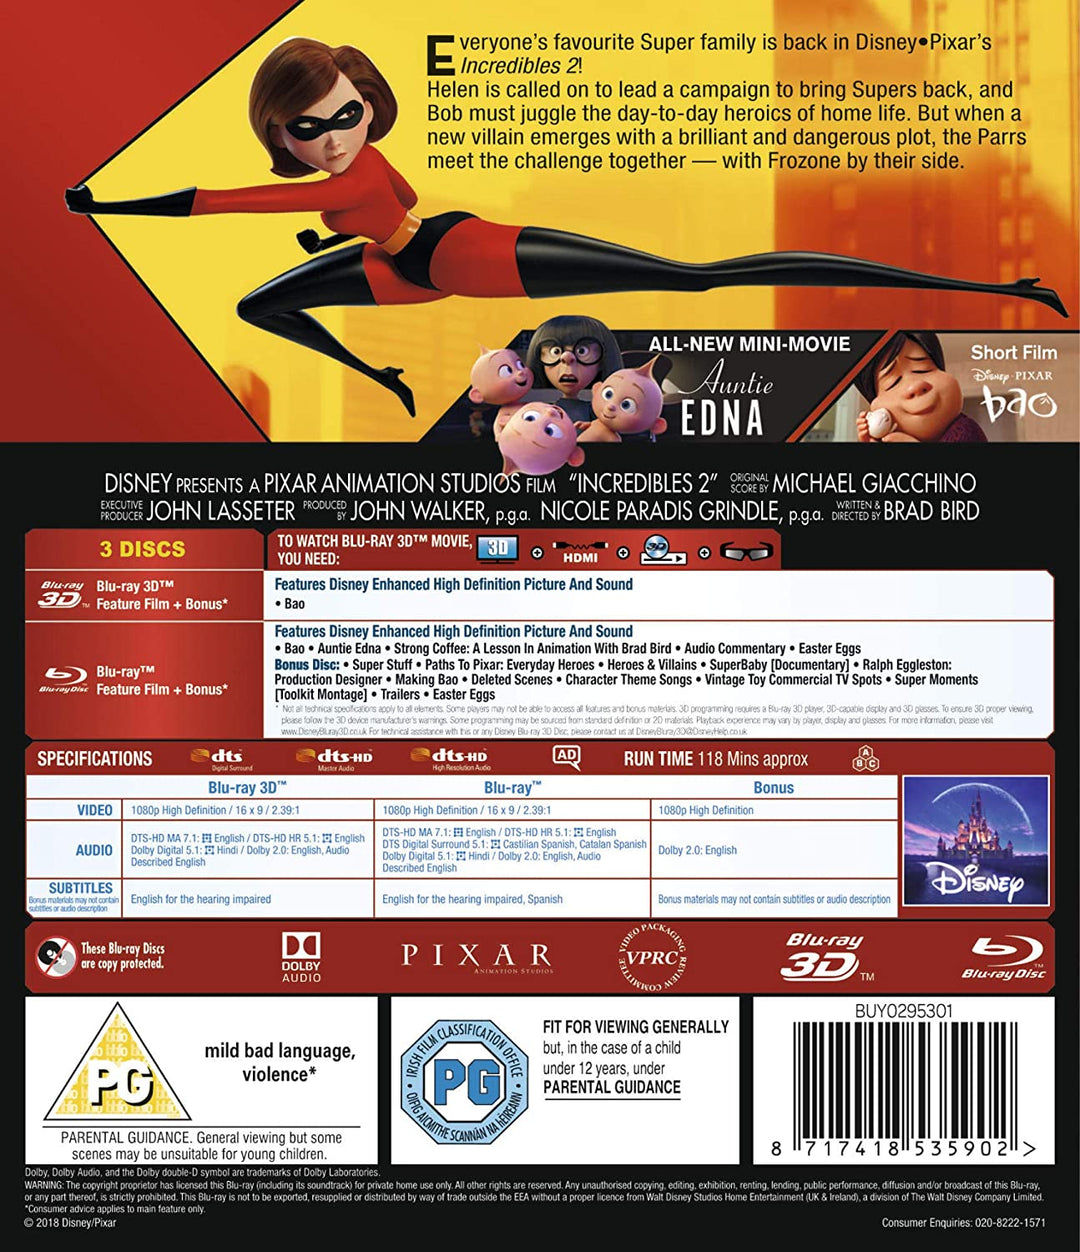 Incredibles 2 - Family/Comedy [Blu-Ray]